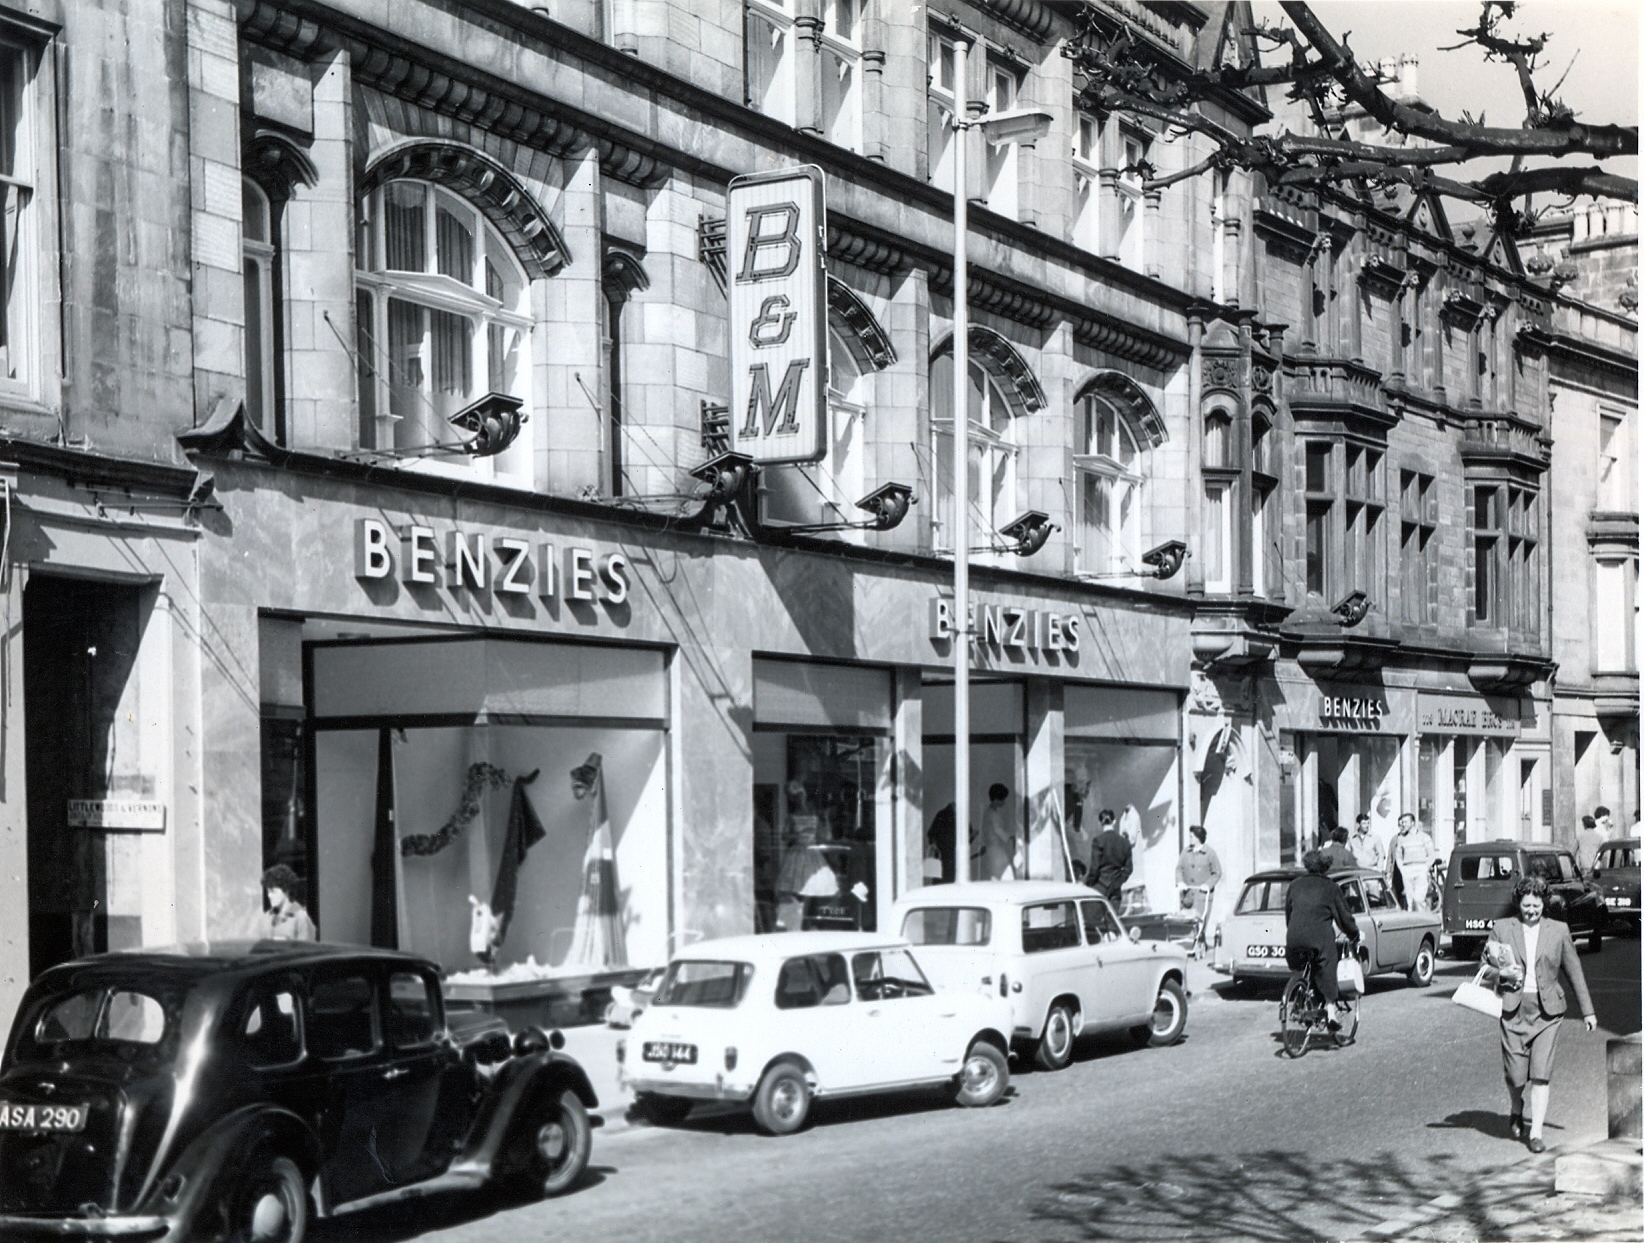 Benzie's department store occupied the St Giles Centre in the 1960s.